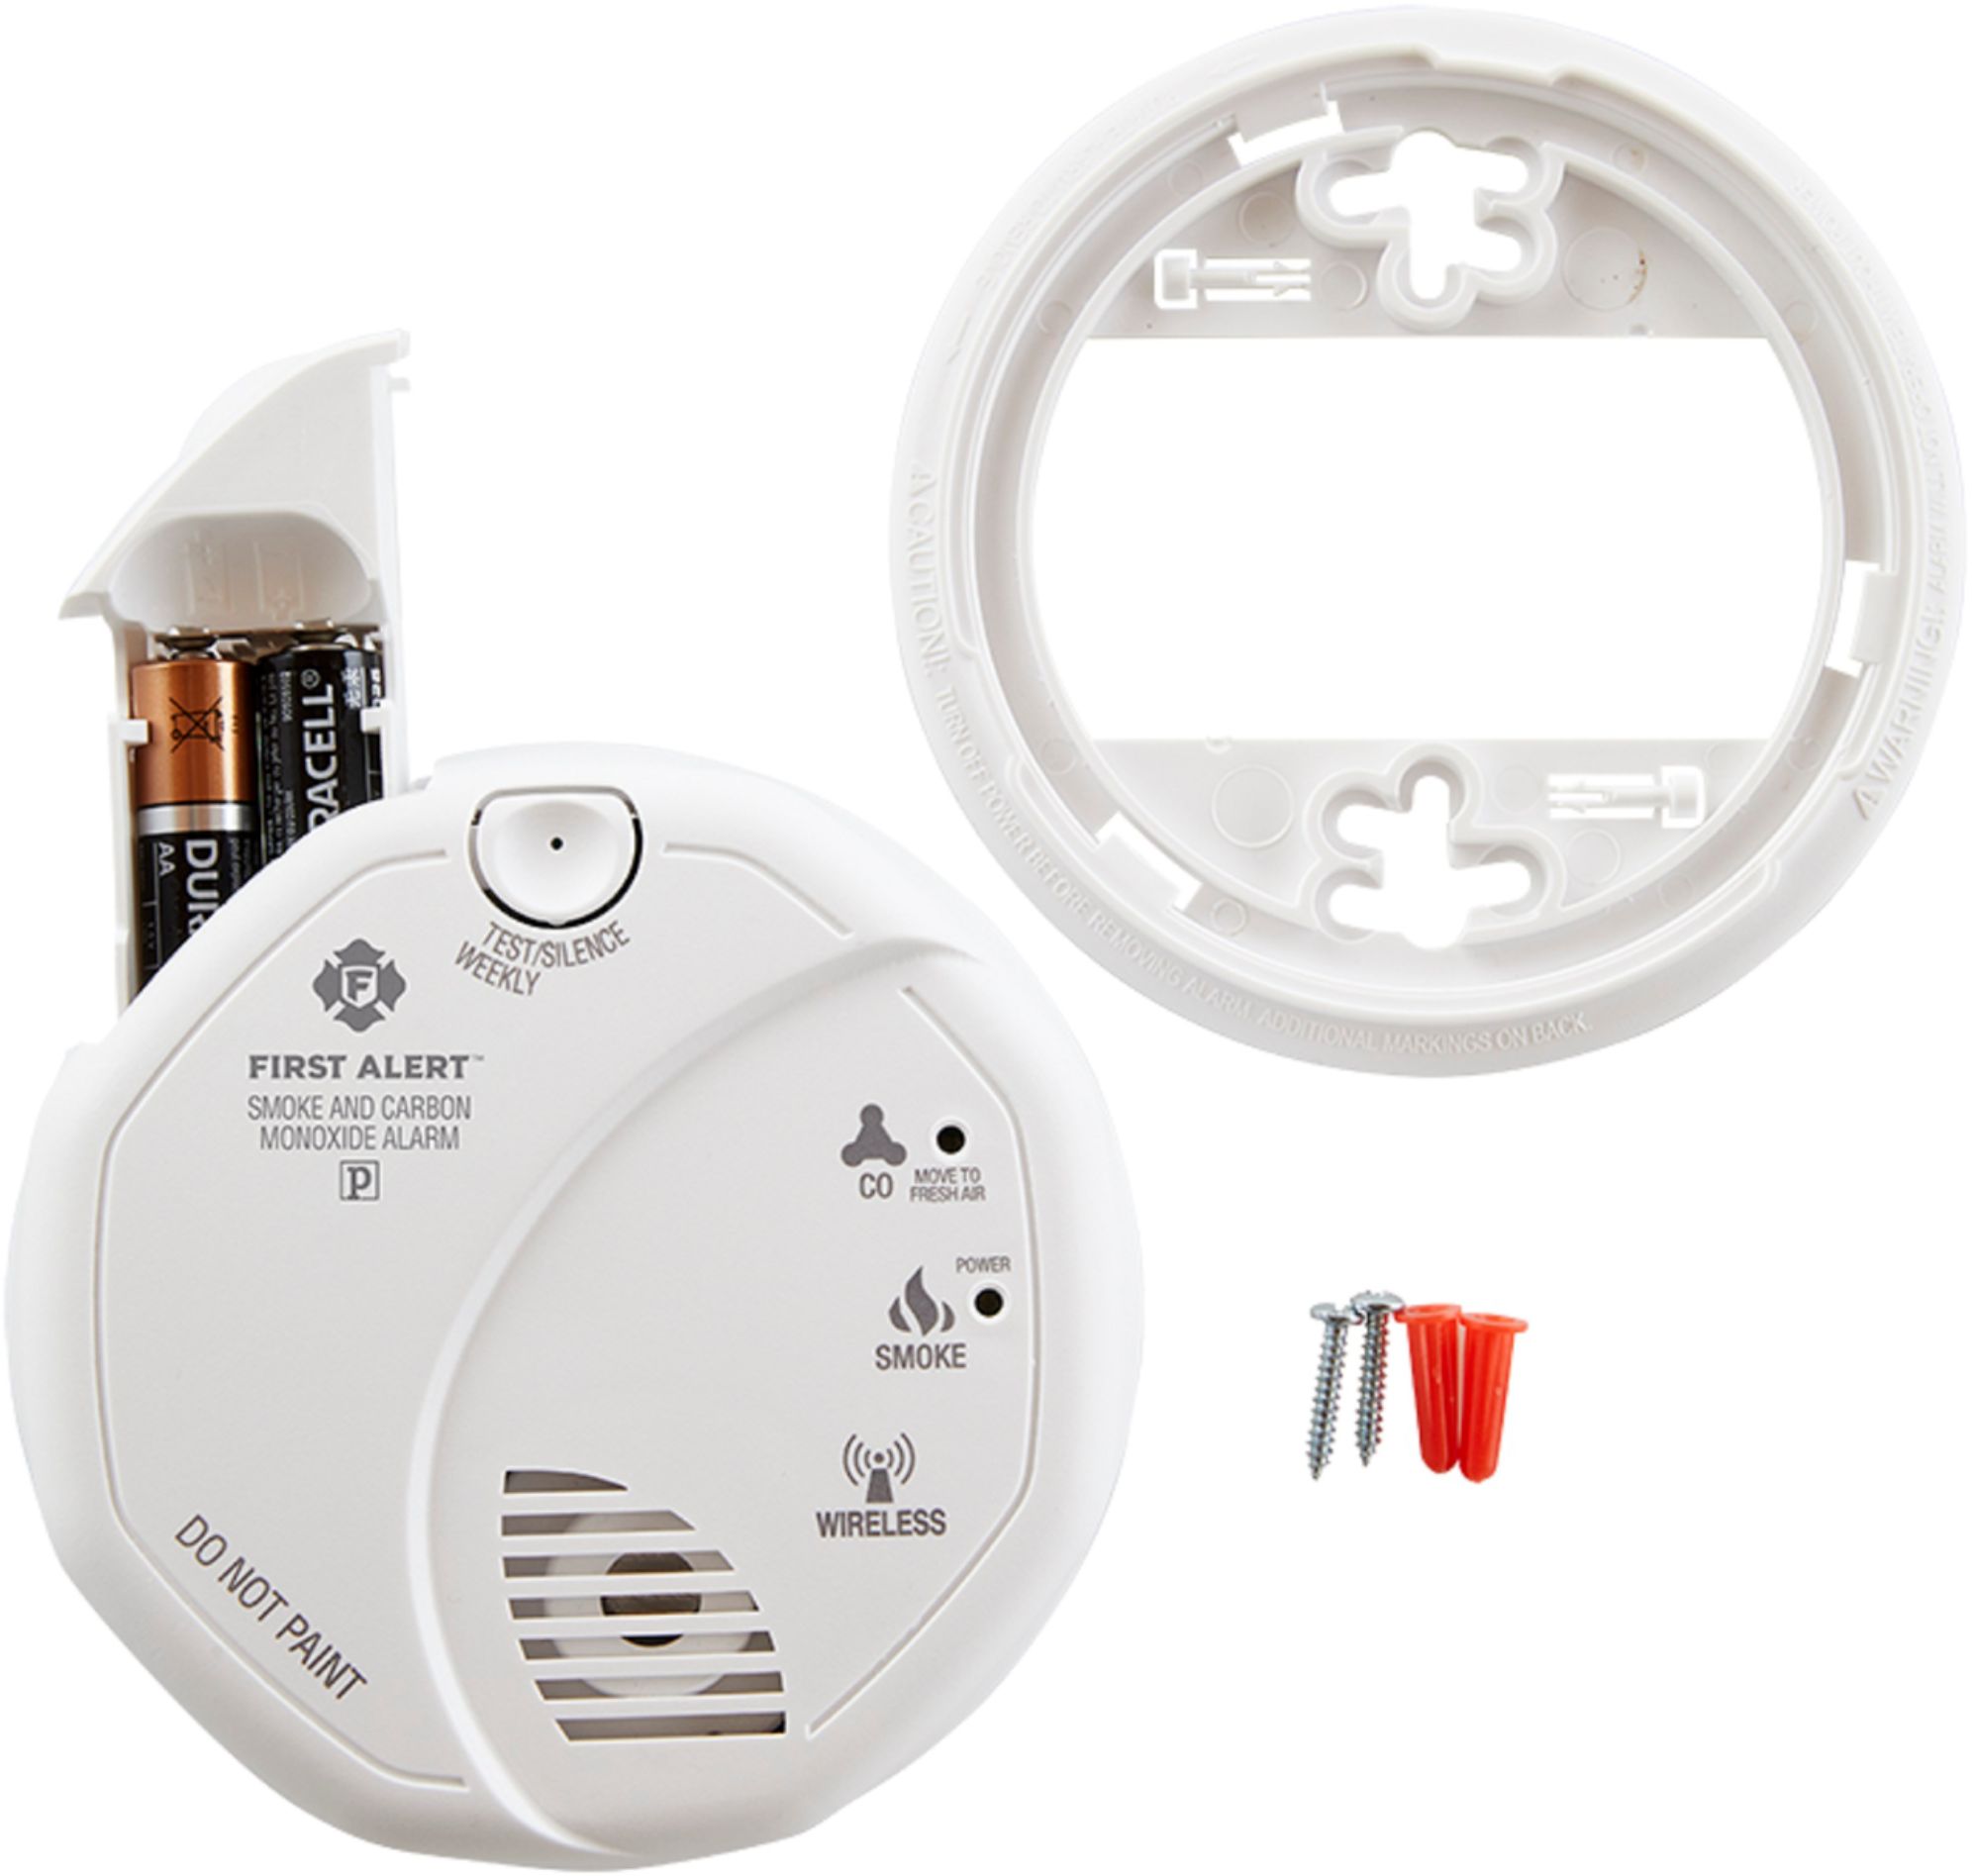 Smoke and Carbon Monoxide Alarm First Alert White Works with Ring 